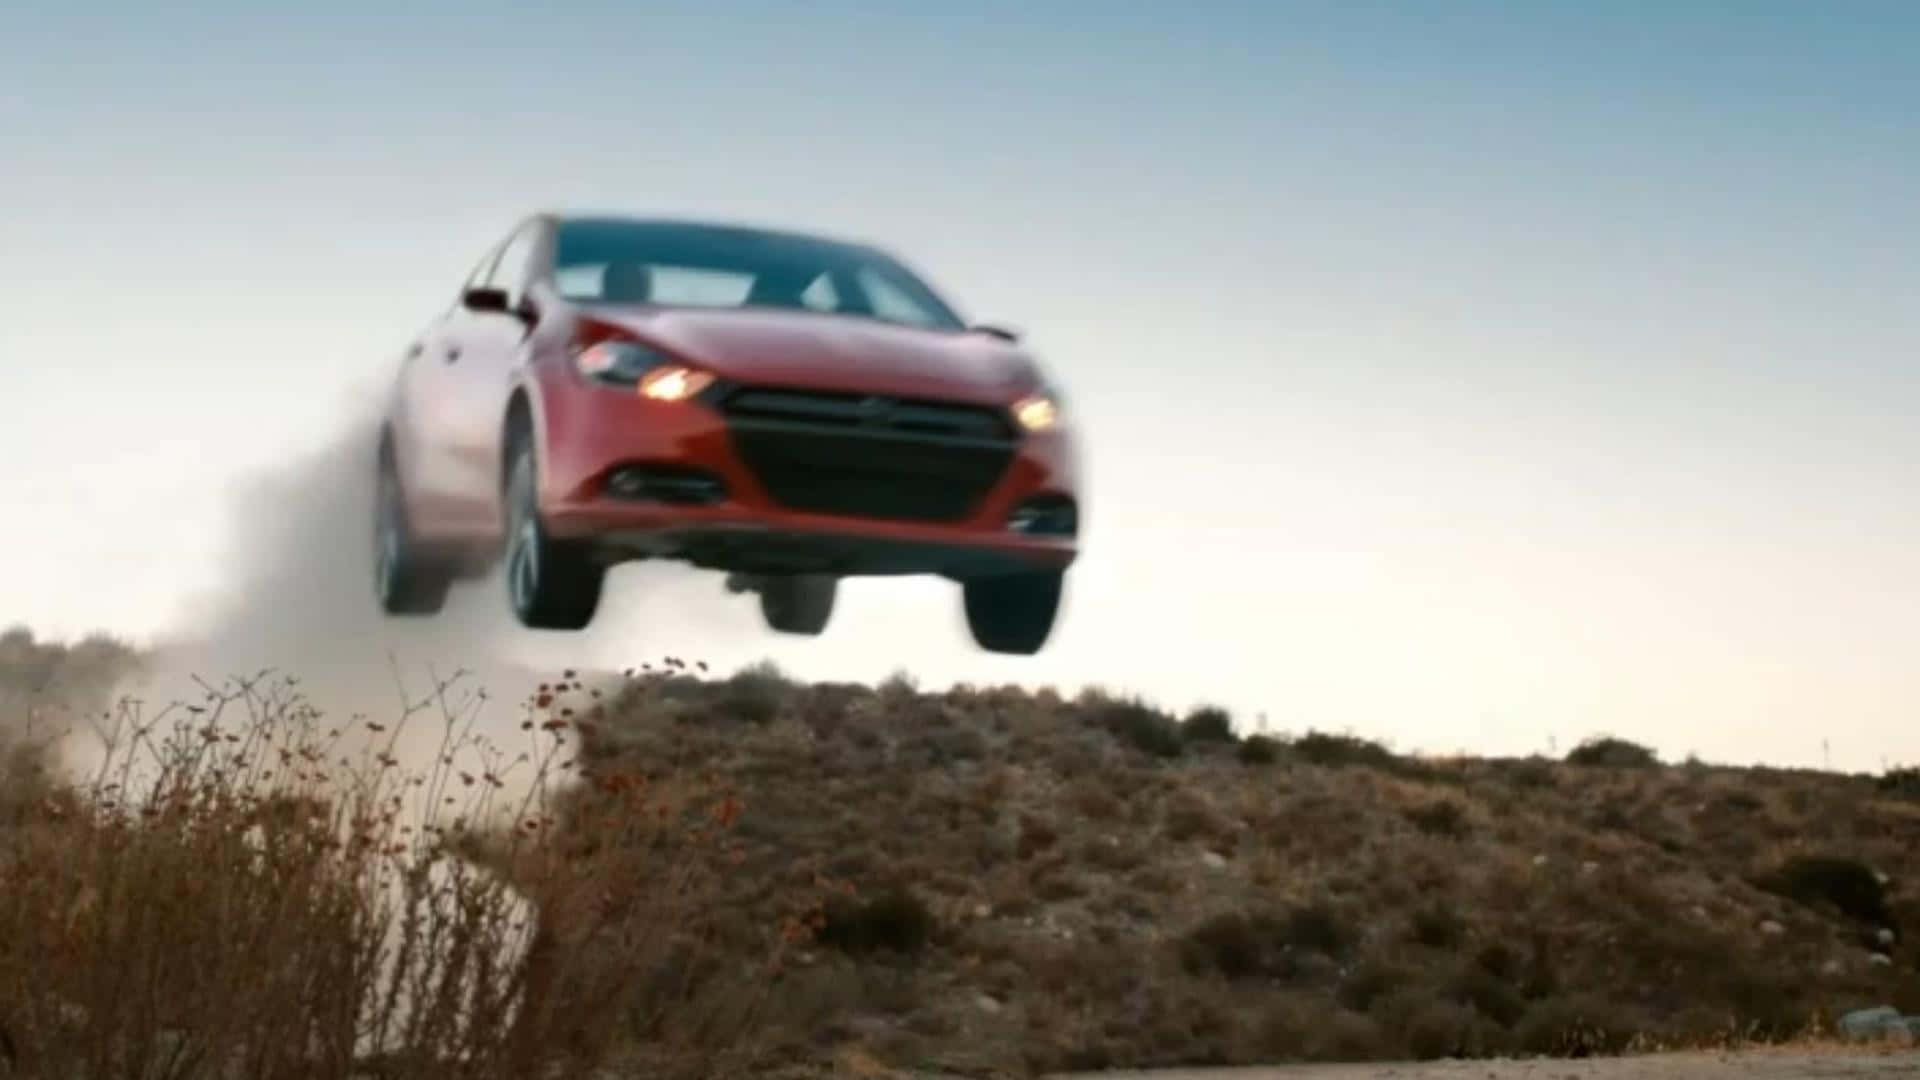 Captivating Image Of Dodge Dart In Action Wallpaper